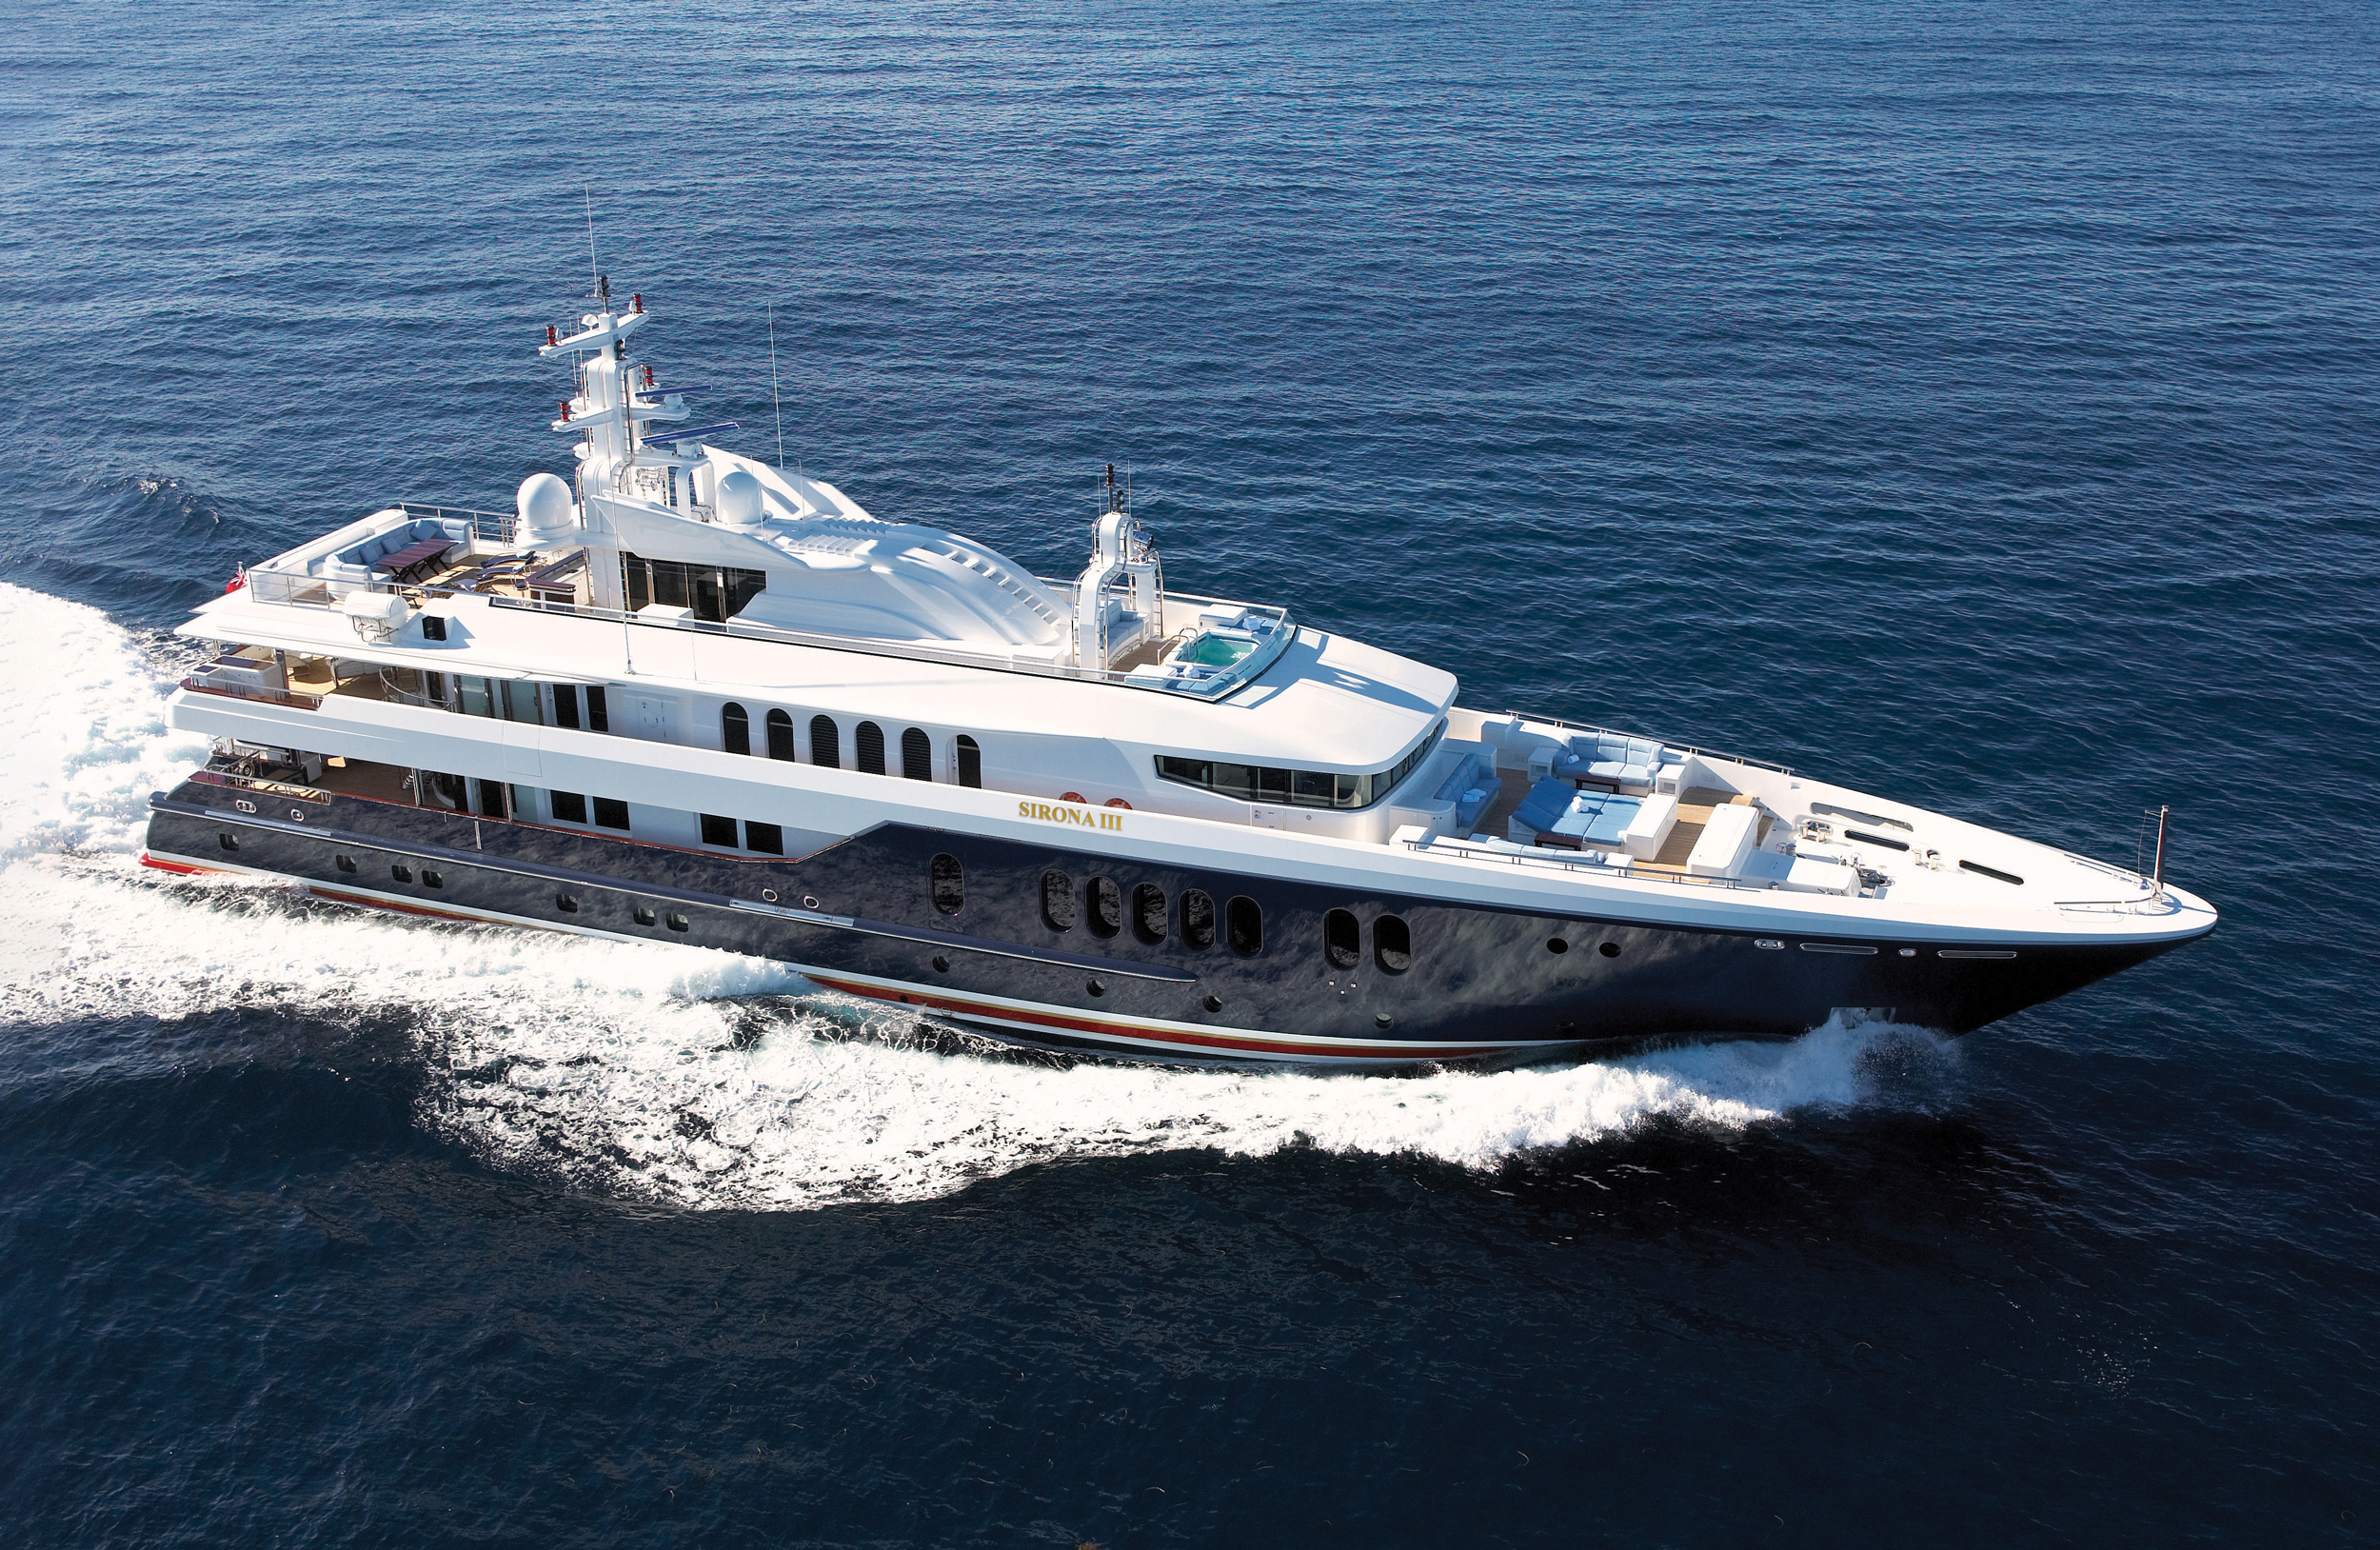 SIRONA III charter specs and number of guests